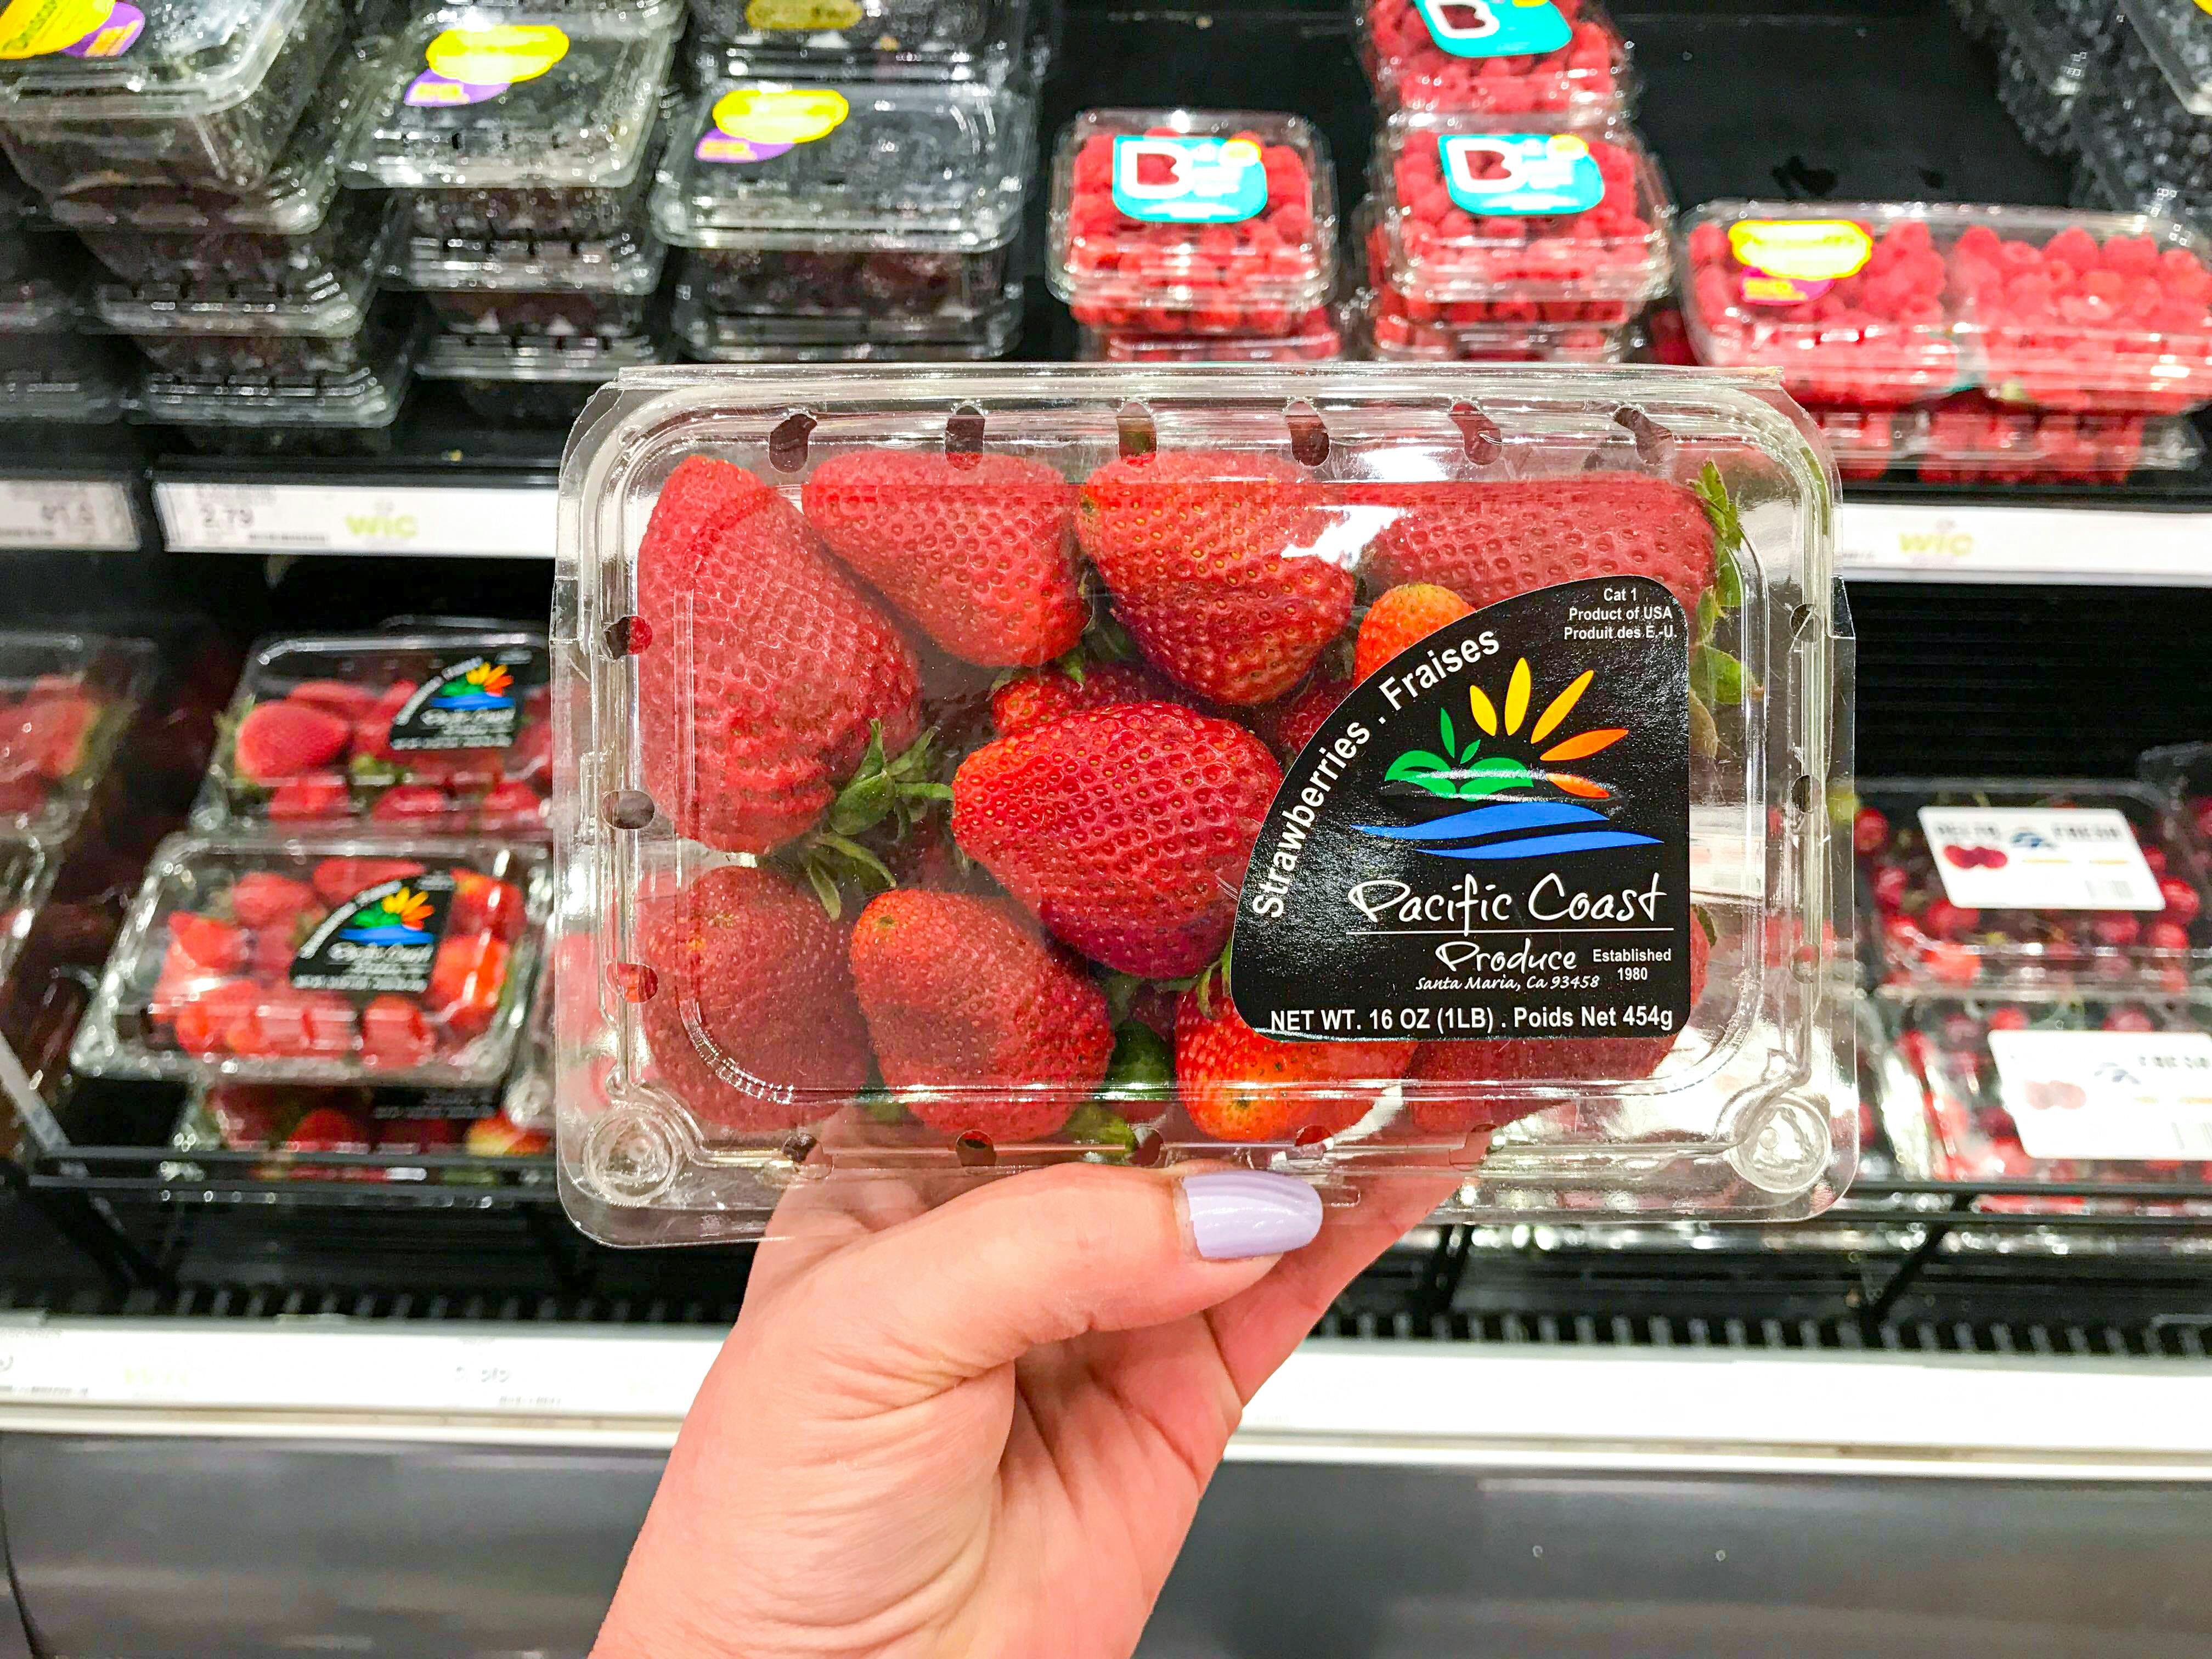 Someone holding a package of strawberries in front of a refrigerated shelf of more fruit in a grocery store.